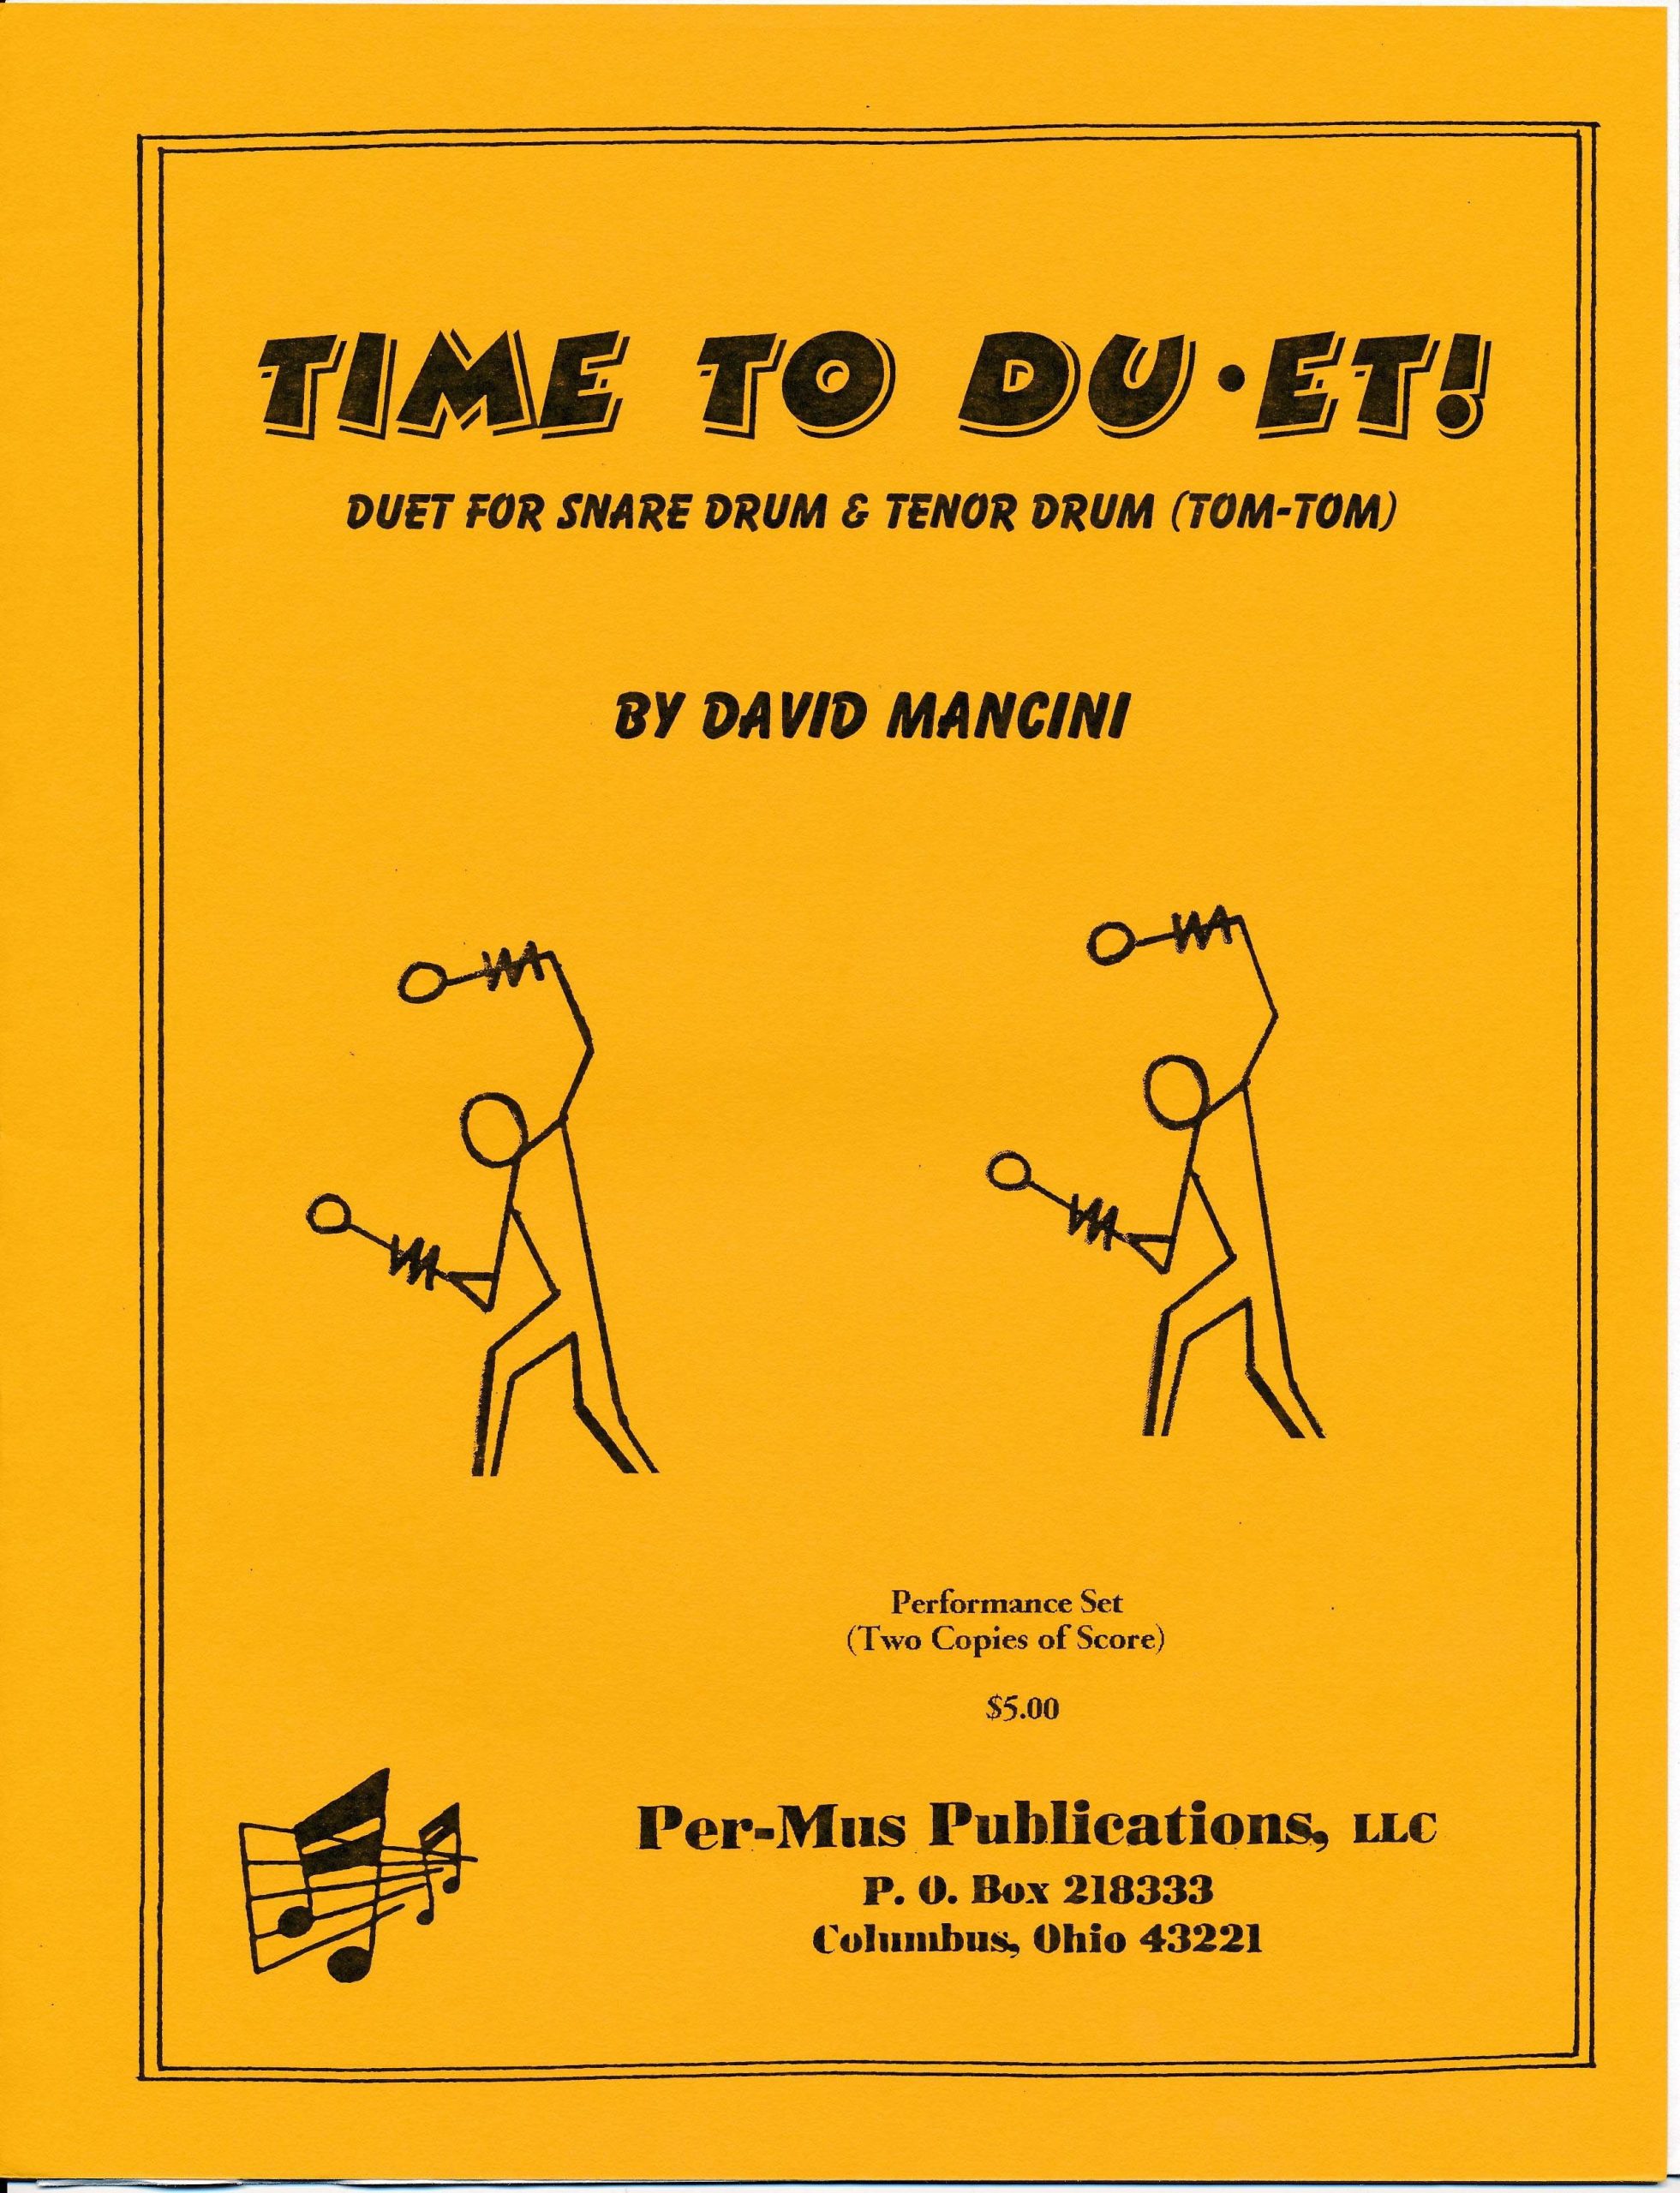 Time To Du-et! by David Mancini